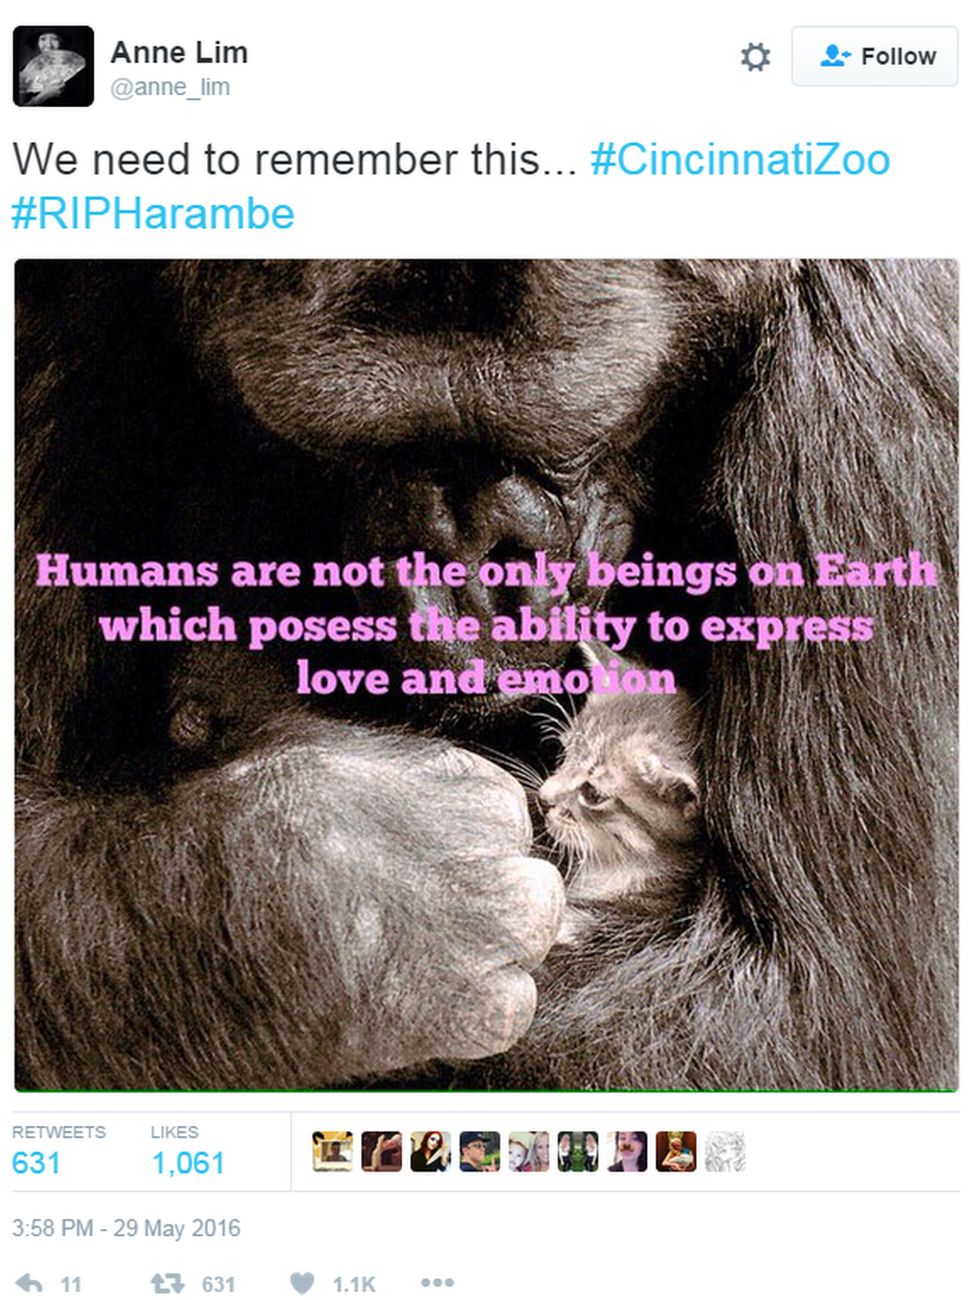 Tweet: we need to remember that humans aren't the only animals capable of love and empathy